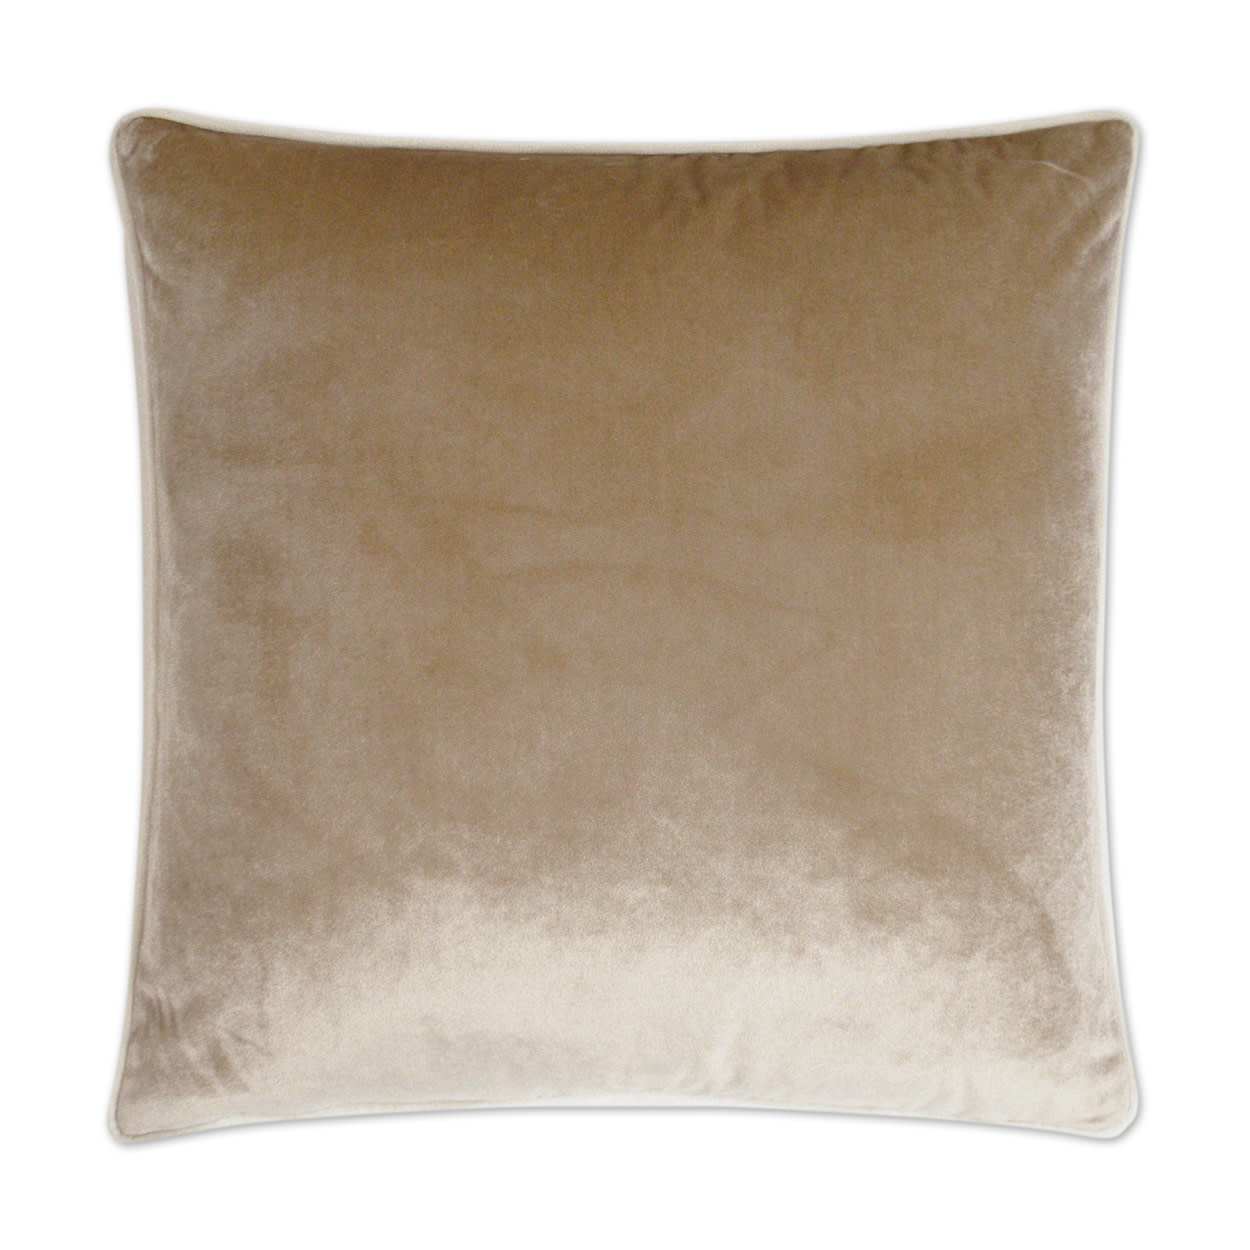 Darling Pillow Taupe - 20 x 20